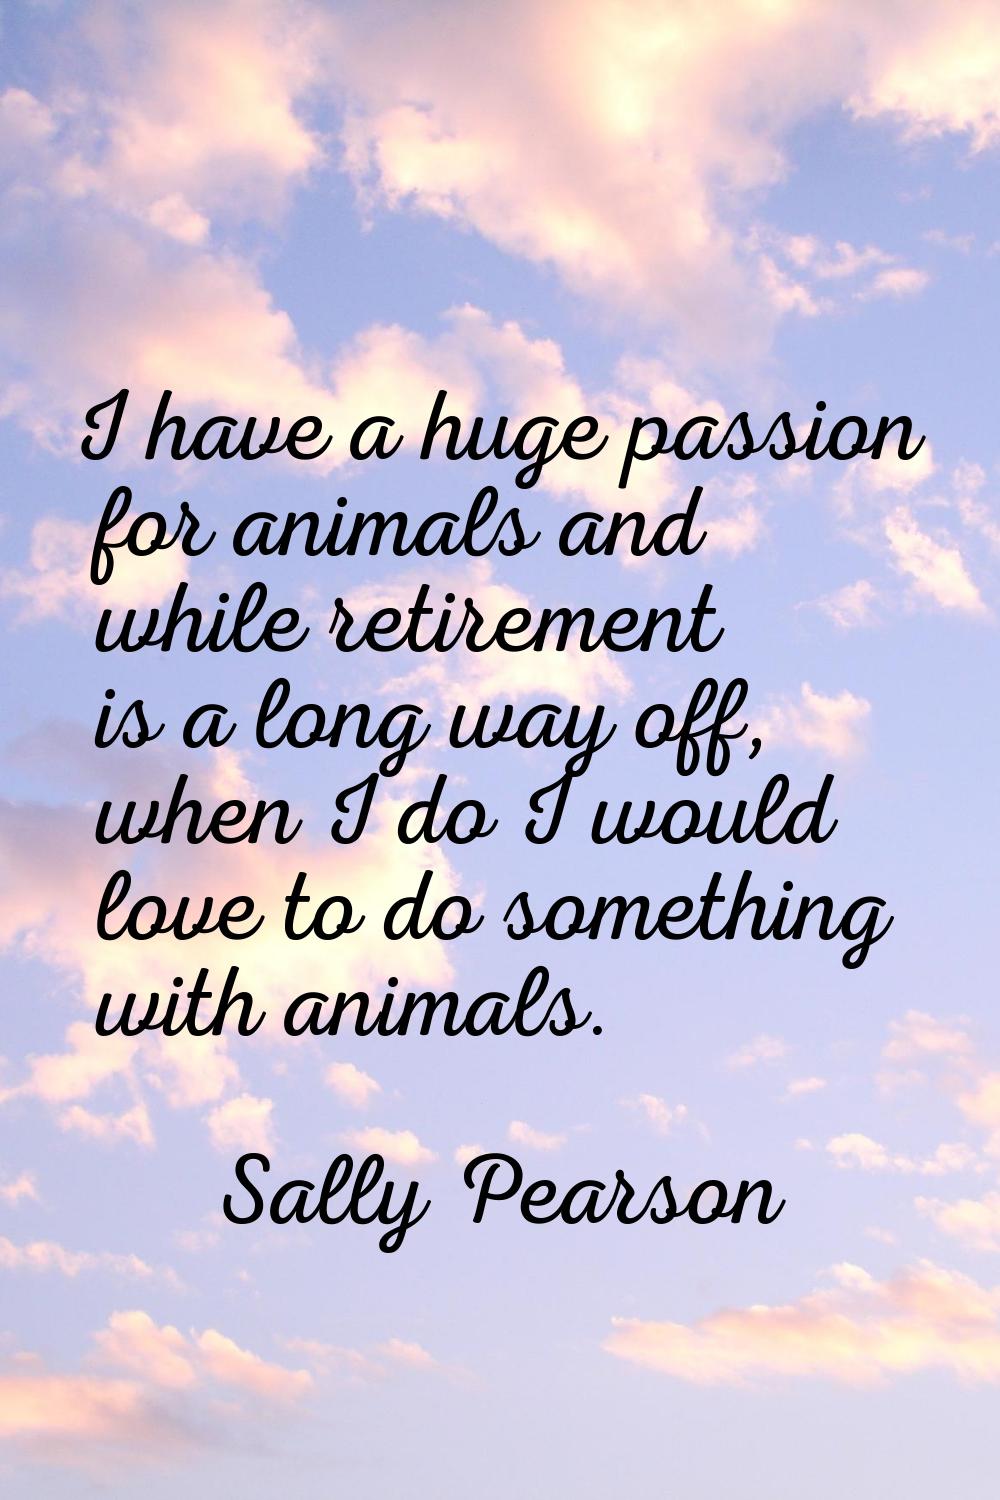 I have a huge passion for animals and while retirement is a long way off, when I do I would love to